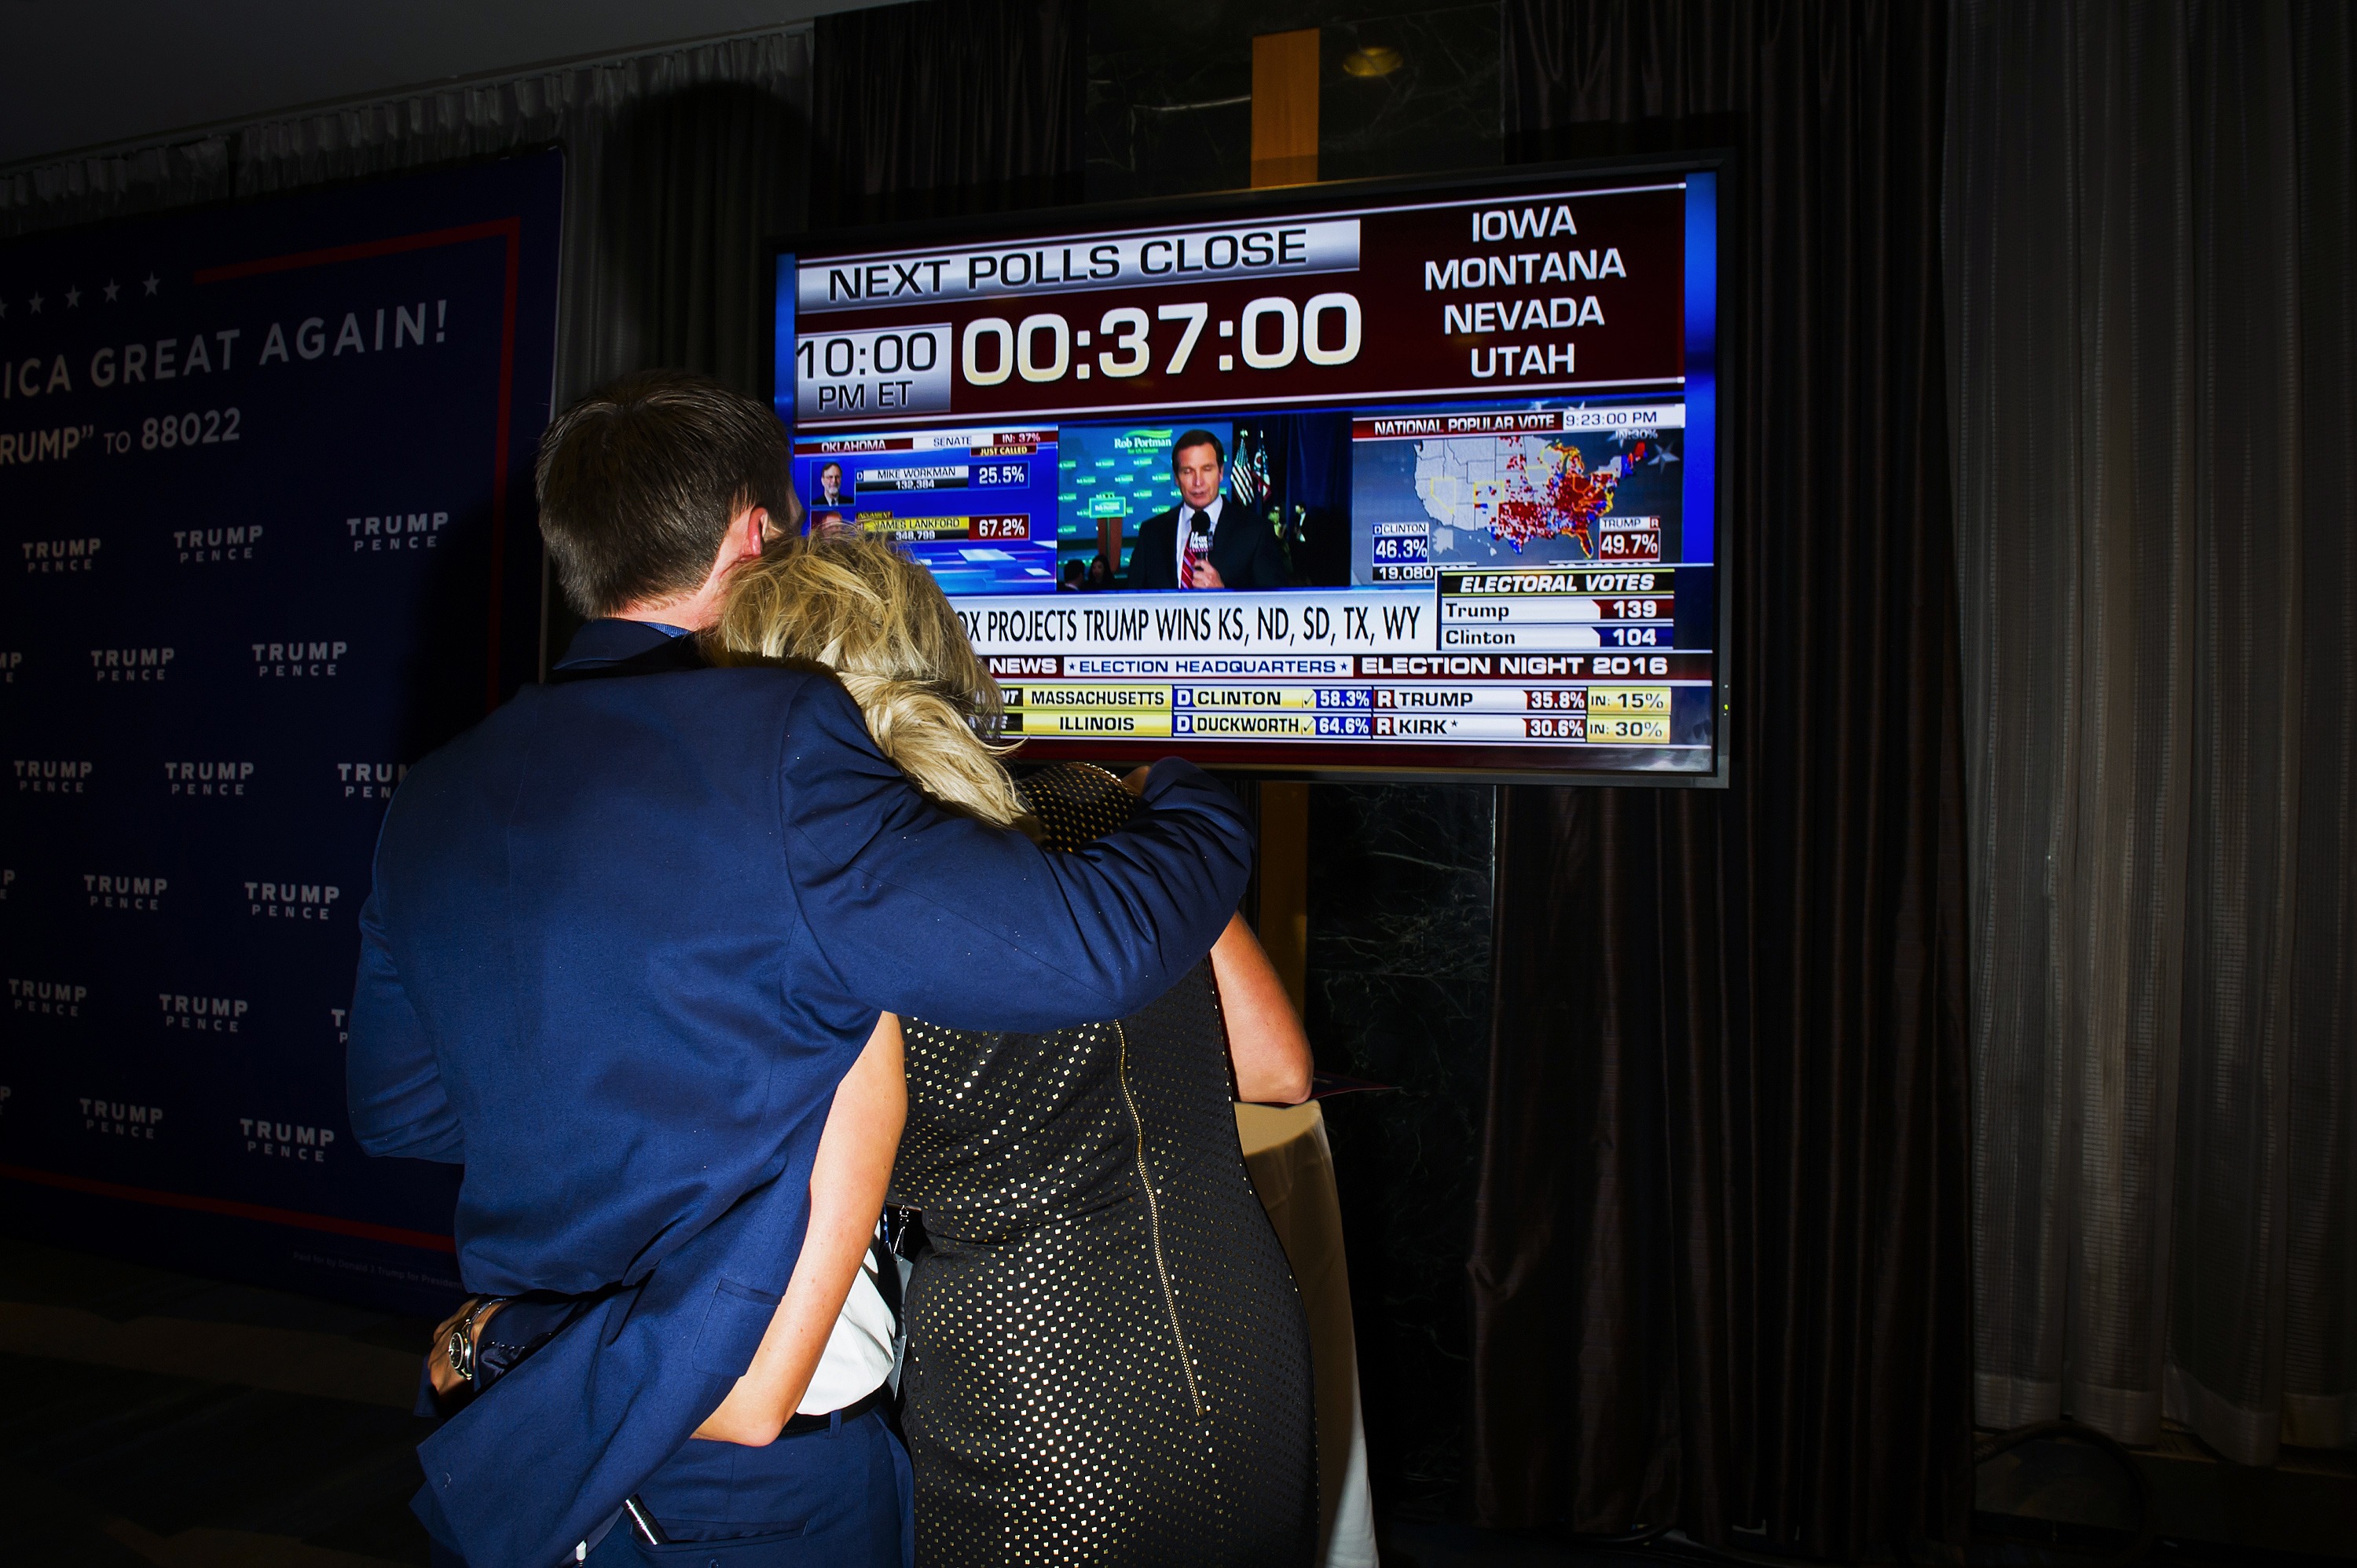 Scenes at an election night party for Republican presidential candidate Donald Trump, Tuesday, Nov. 8, 2016 in New York's Manhattan borough. Trump faces Democratic nominee Hillary Clinton in the contest for president of the United States.